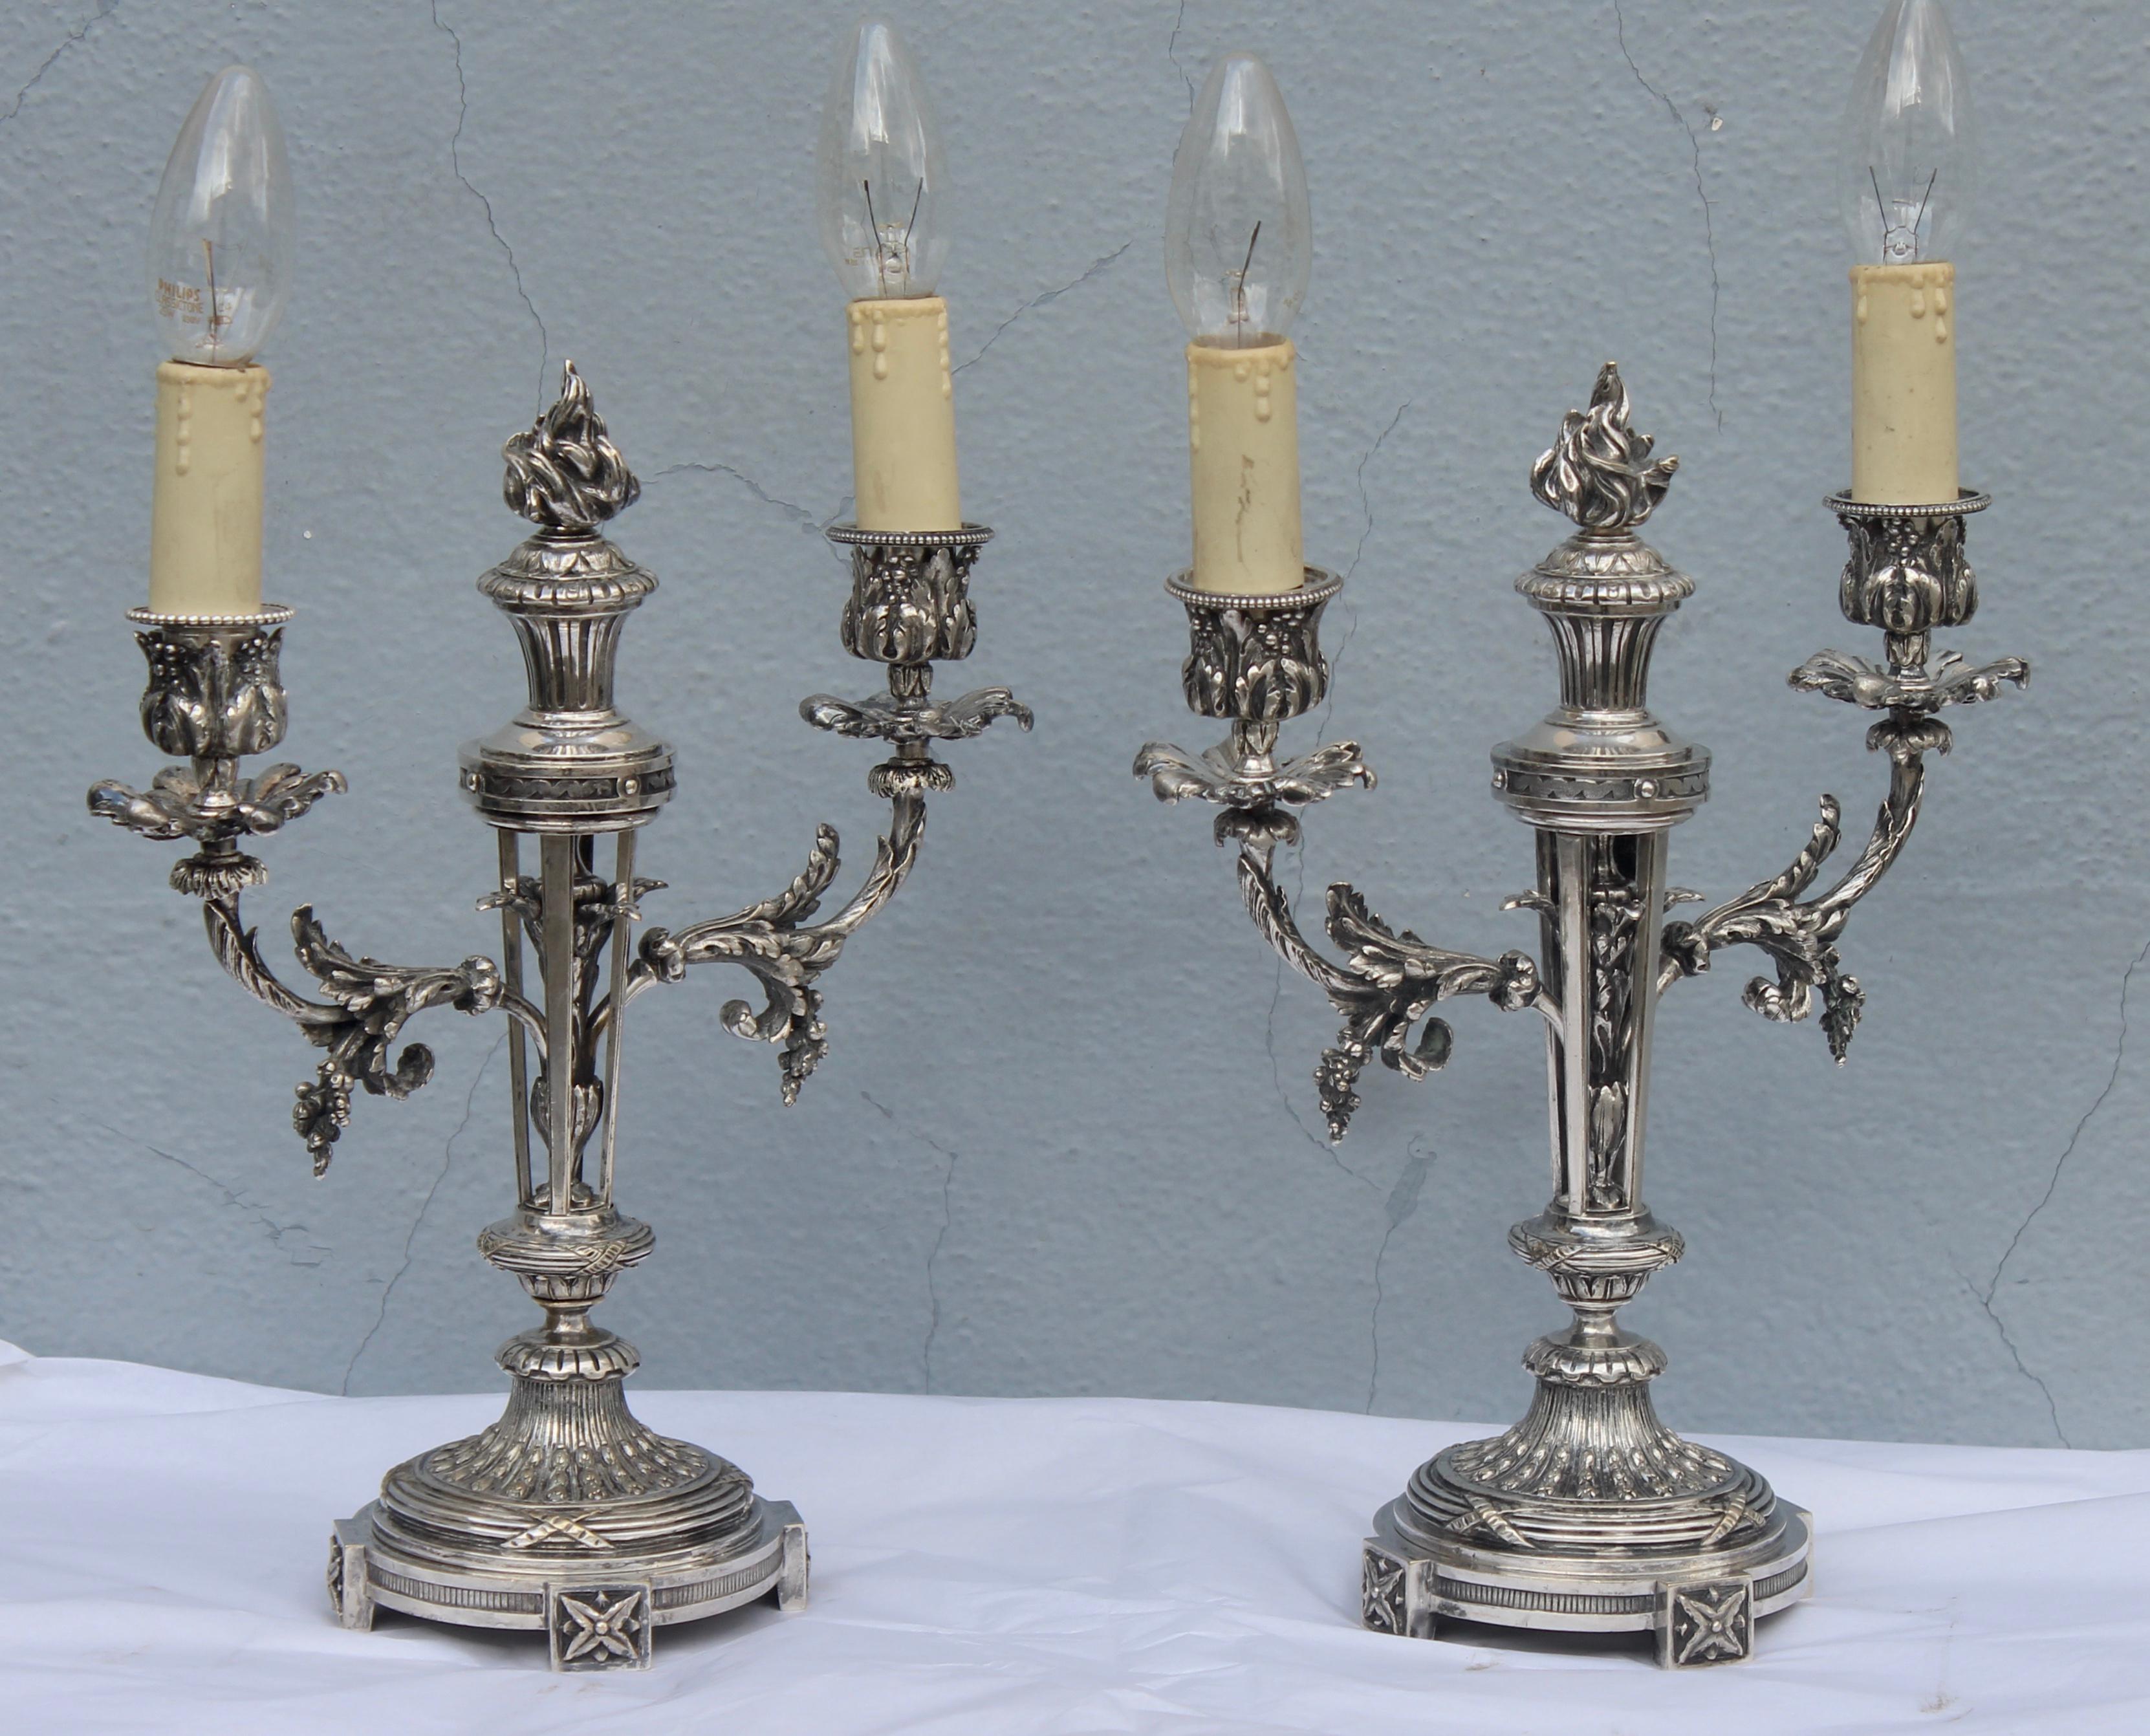 19th century pair of Louis XVI style silvered bronze twin-branch candelabras
the open work stem with flambeau finial
circa 1880.